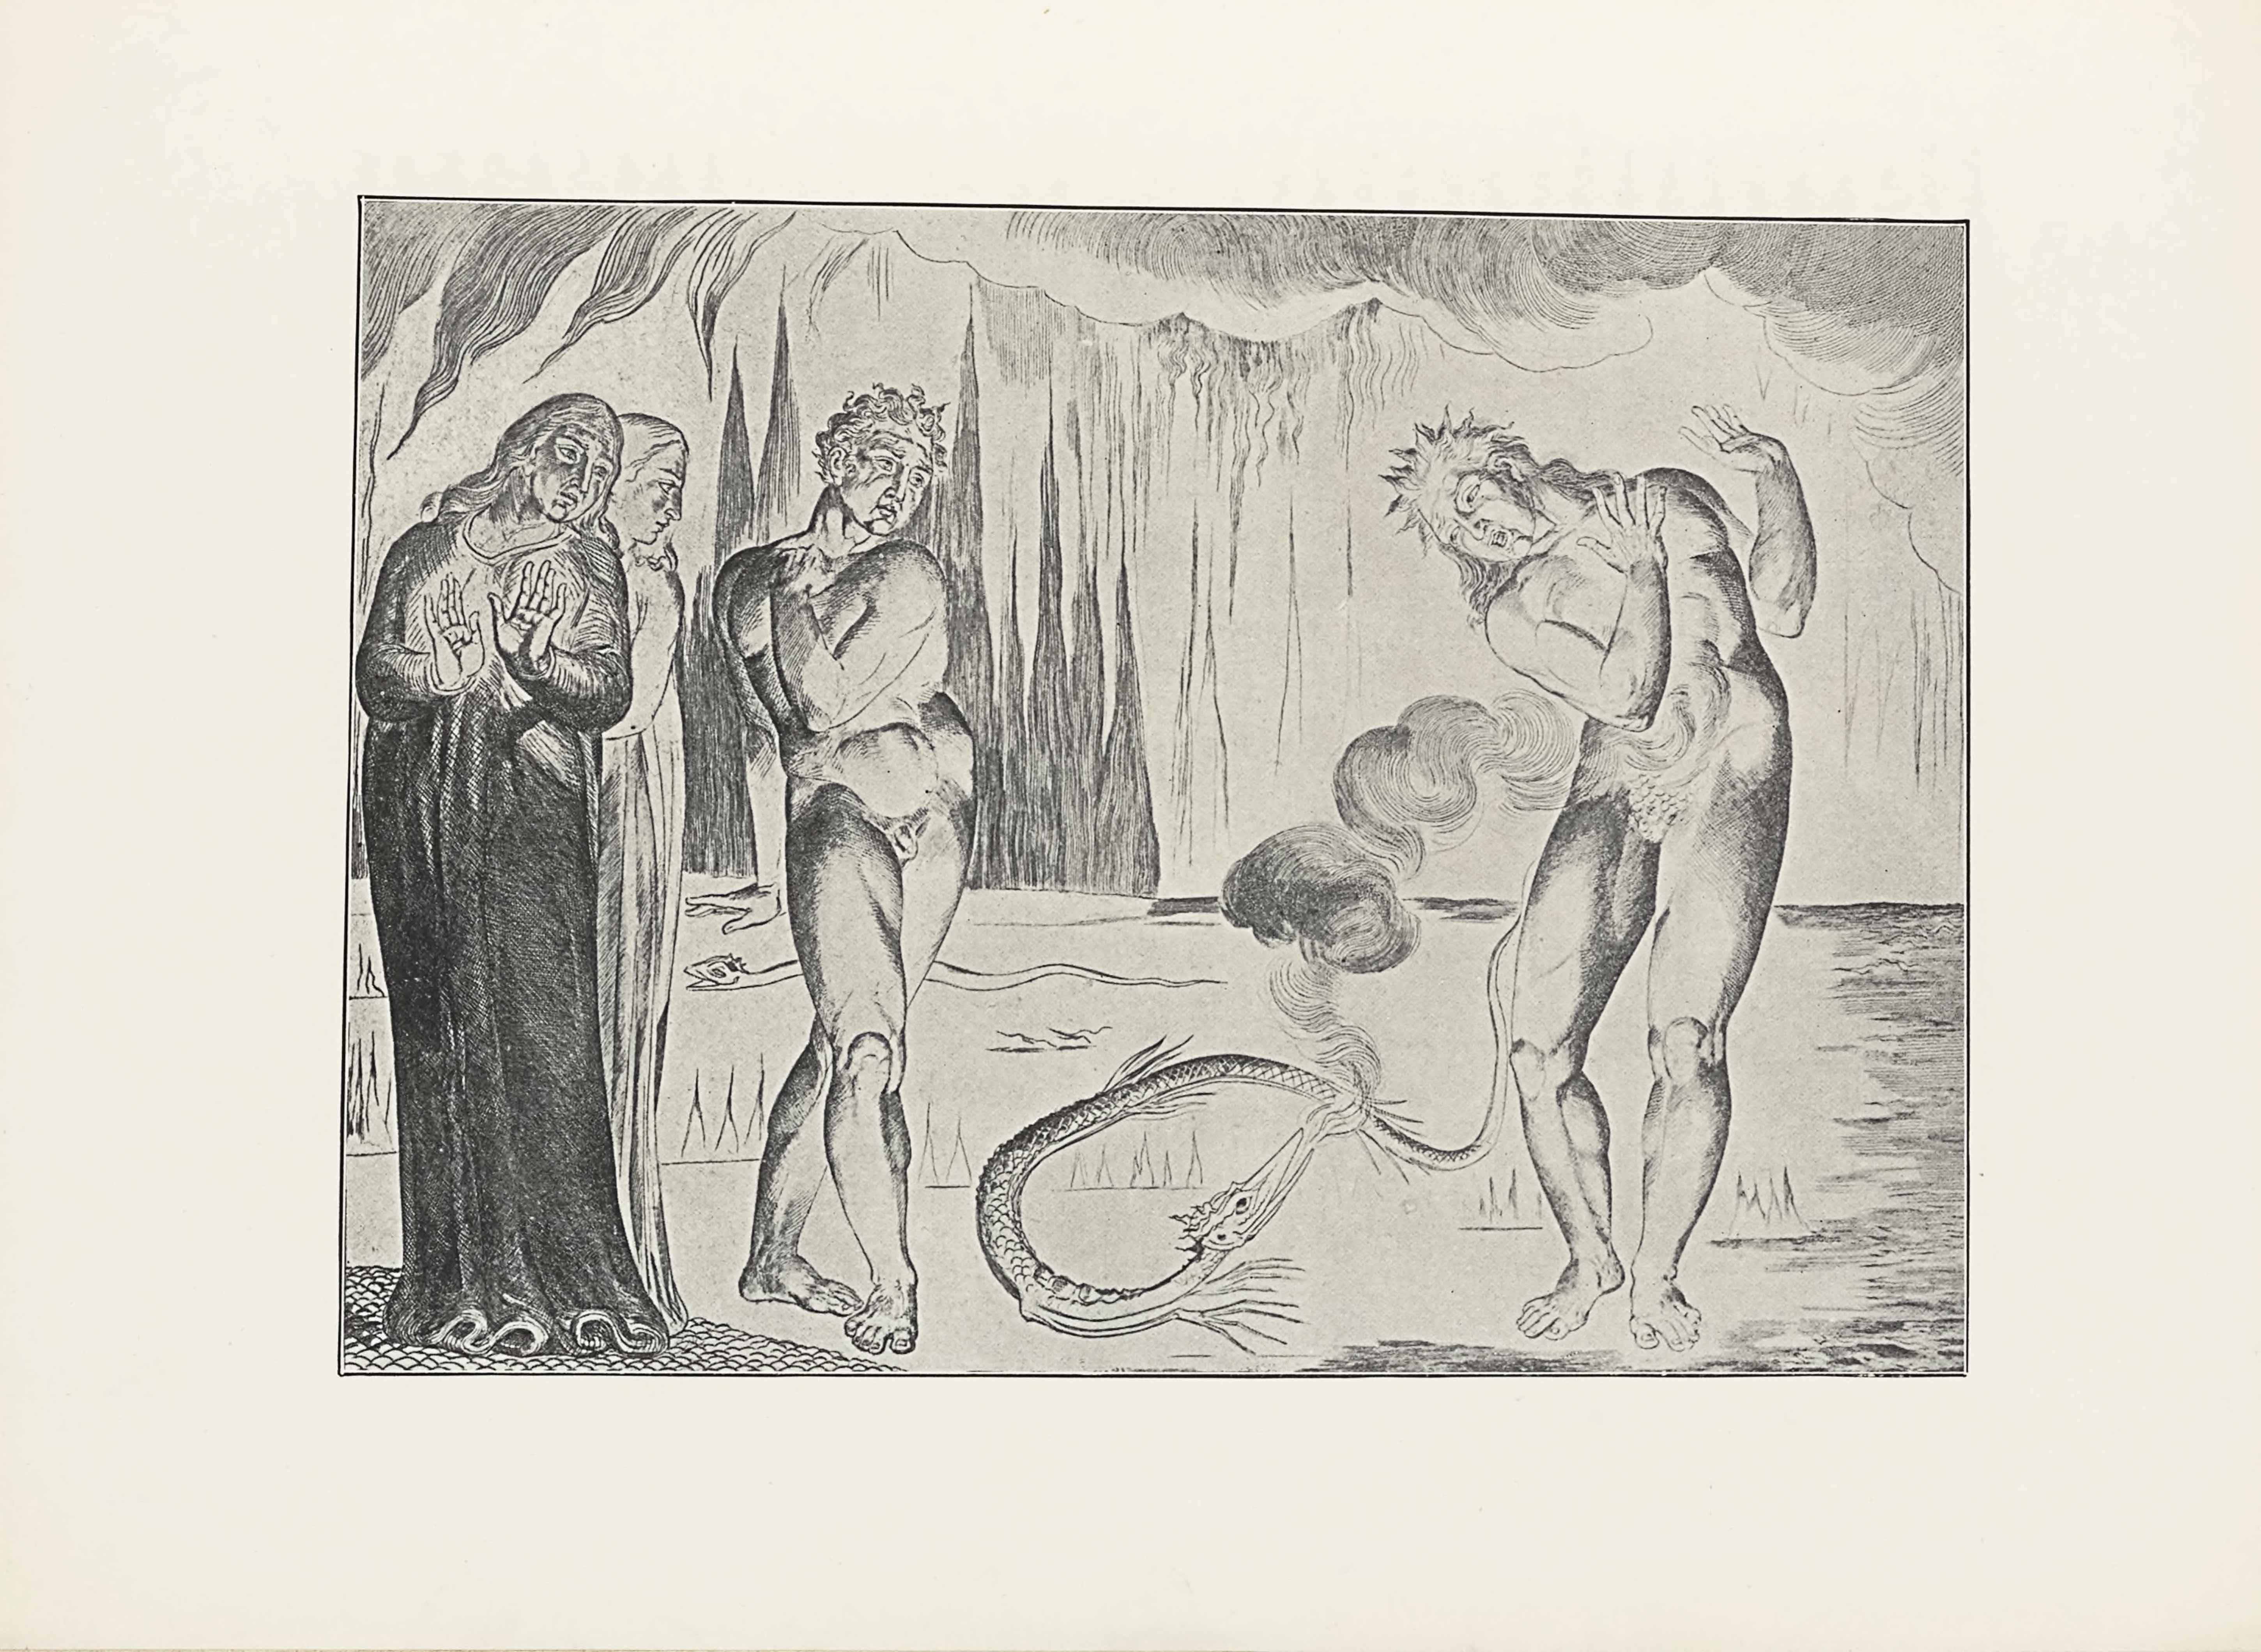 This halftone reproduction of Blake’s engraving for Dante’s Inferno is in landscape orientation. The image shows four figures in hell; three on the left watch a fourth on the right being attacked by a serpent. On the far left are two robed figures, likely Dante and Virgil. The first figure on the left is standing in the foreground and rises to three-quarters up the page in height. The figure, likely Dante, is wearing a long and dark robe. His body is facing the viewer with his head turned towards the right, giving a three-quarters profile. His hands are raised up at a ninety degree angle with his palms facing the viewer. His eyes look towards the snake attacking the naked figure to his right. There is a second robed man standing behind and to the right of the first. He is visible in profile, with his face looking to the right toward the serpent attacking the naked man (Buoso Donati). To the right of the two robed figures are two naked men. The first stands close to the robed pair, with his body facing the viewer, but his head is turned to look down at the snake on the ground. His right leg is crossed in front of his left leg and his toes are pointed in to face each other. He has short curly hair. His left arm is pulled across his body, with his left hand resting on his right shoulder. His right arm is pulled behind his back. To the right of him on the ground is the serpent. It is scaled and its body is twisted in a loop, with the head and tail on the right. The serpent has its head lifted to look up at a naked figure standing to its right. The snake’s head is long and the mouth is open with smoke rising out of it in puffs up and to the right. The naked figure to the right of the snake is standing with the body facing the viewer. The male figure is in a defensive posture, with the right leg lifted slightly, pulled away from the serpent. The figure’s arms are lifted in front in a ninety degree angle. The figure’s upper body is leaned down towards the serpent, with the face turned to look down at it, his mouth is opened in an “o” shape. The figure has spiked hair on the top of the head with longer pieces falling down the back. The ground on which all of the figures and snake rest is flat and plain, with a small design of rocky ground under the feet of the robed men. In the mid-ground is more flat land with intermittent pieces of jagged rock. There is also another snake or serpent in the mid-ground to the left of the one in the foreground. This snake is facing to the left and stretched out in a long horizontal line. At the halfway point up the height of the page is the start of the skyline. The background is made of clouds along the top edge of the page, with jagged lines rising up in the left background. Waved vertical lines are appear intermittently in the distant background.